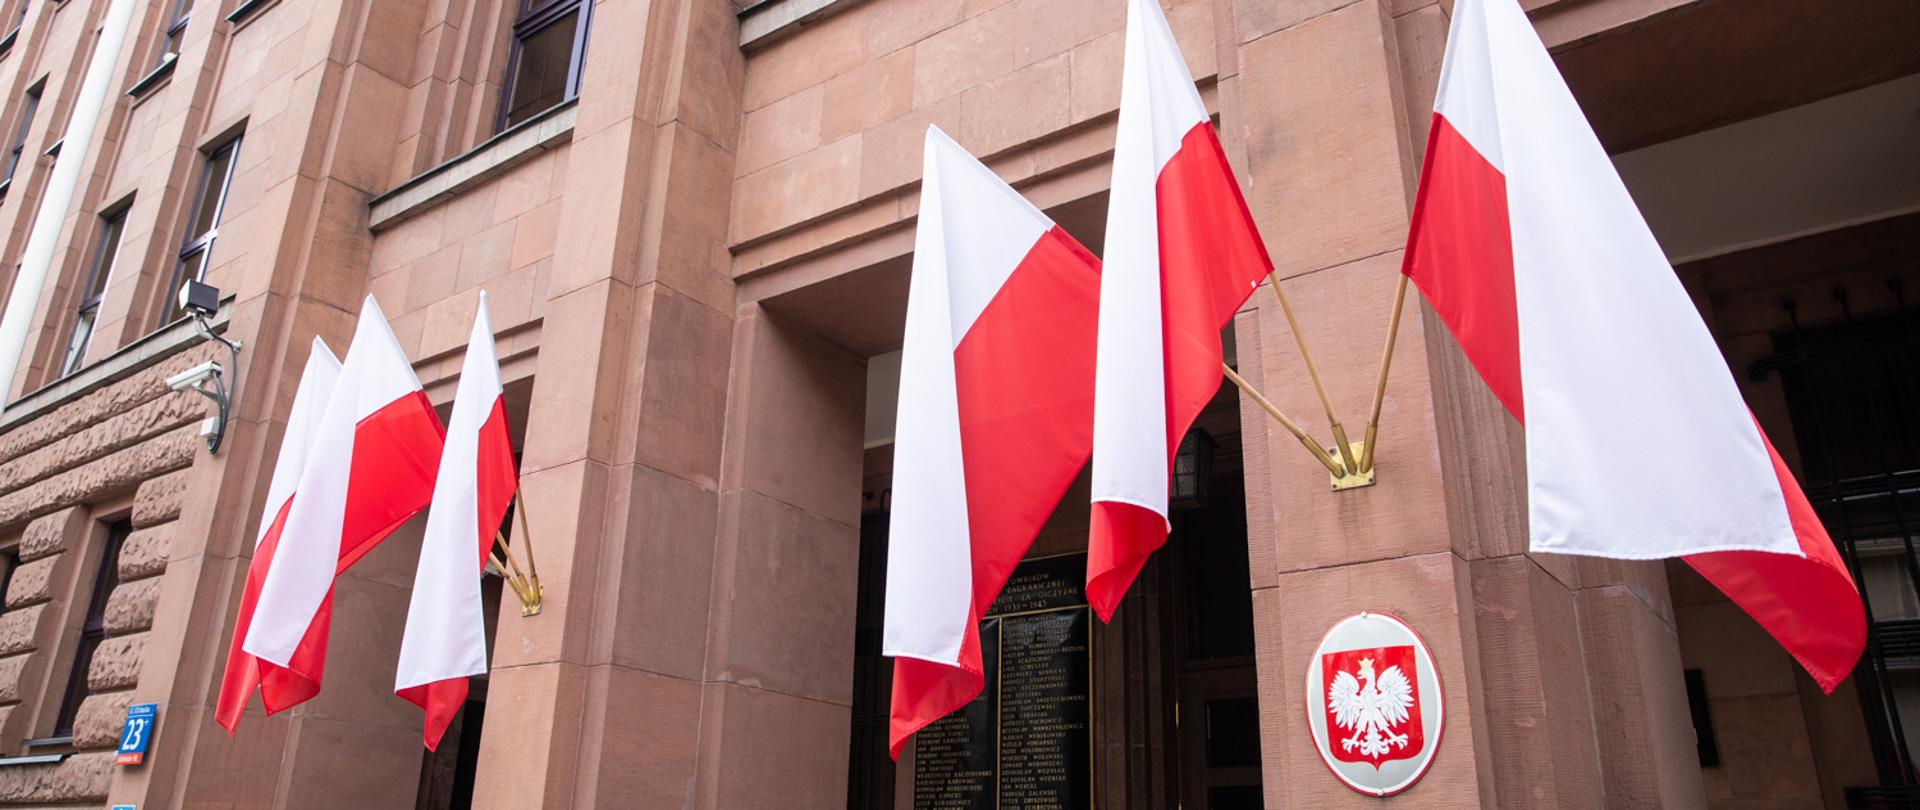 Ministry of Foreign Affairs of the Republic of Poland